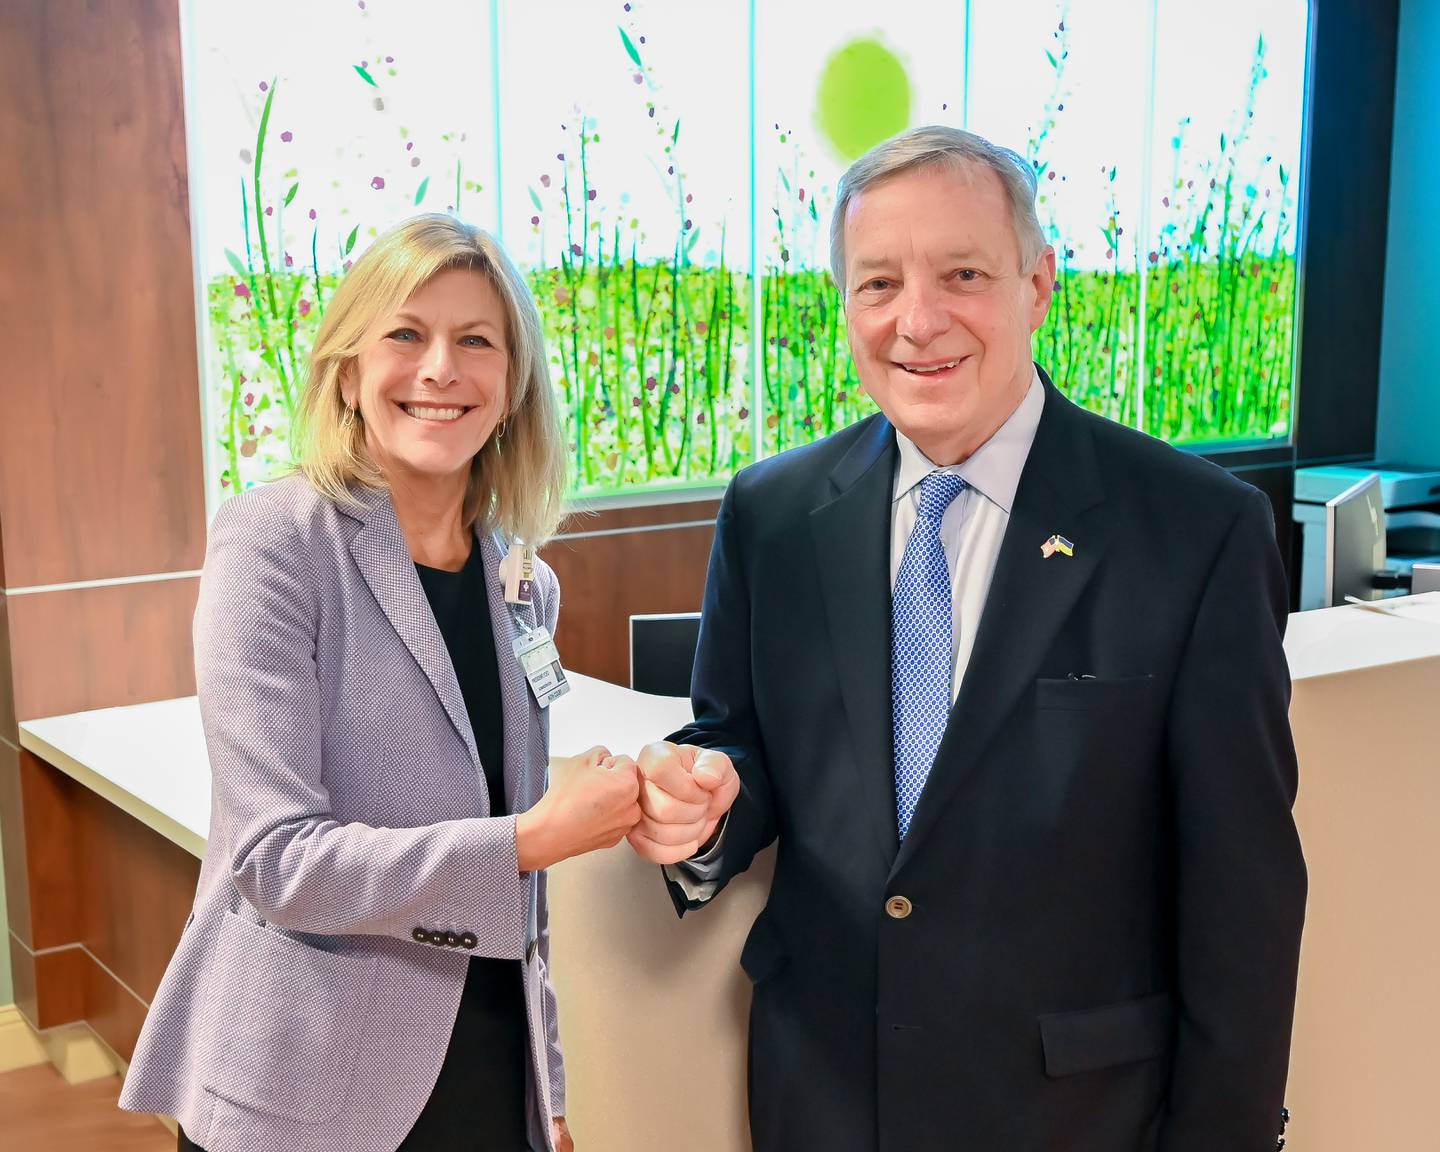 U.S. Sen. Dick Durbin, D-Illinois (front, left) toured the future Amy, Matthew and Jay Vana Neonatal Intensive Care Unit at Silver Cross in New Lenox on Wednesday, April 20, 2022. Durbin is pictured with Silver Cross Hospital President and CEO Ruth Colby.